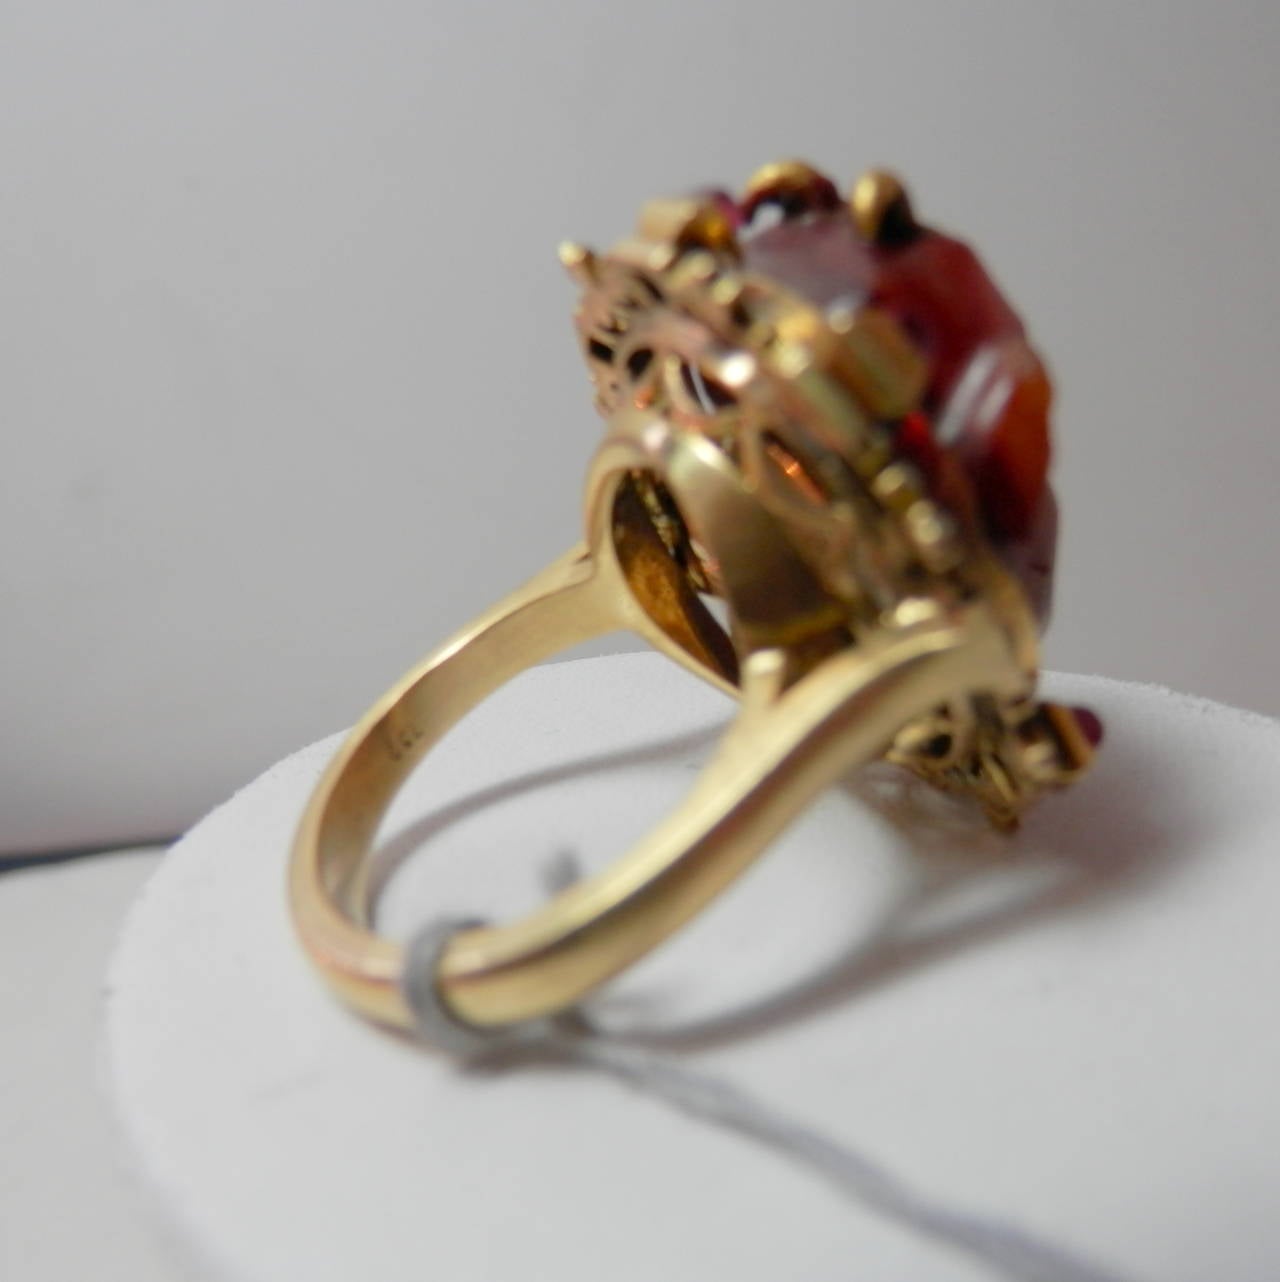 Holbeinesque Antique Enamel, Ruby and Gold Figural Ring